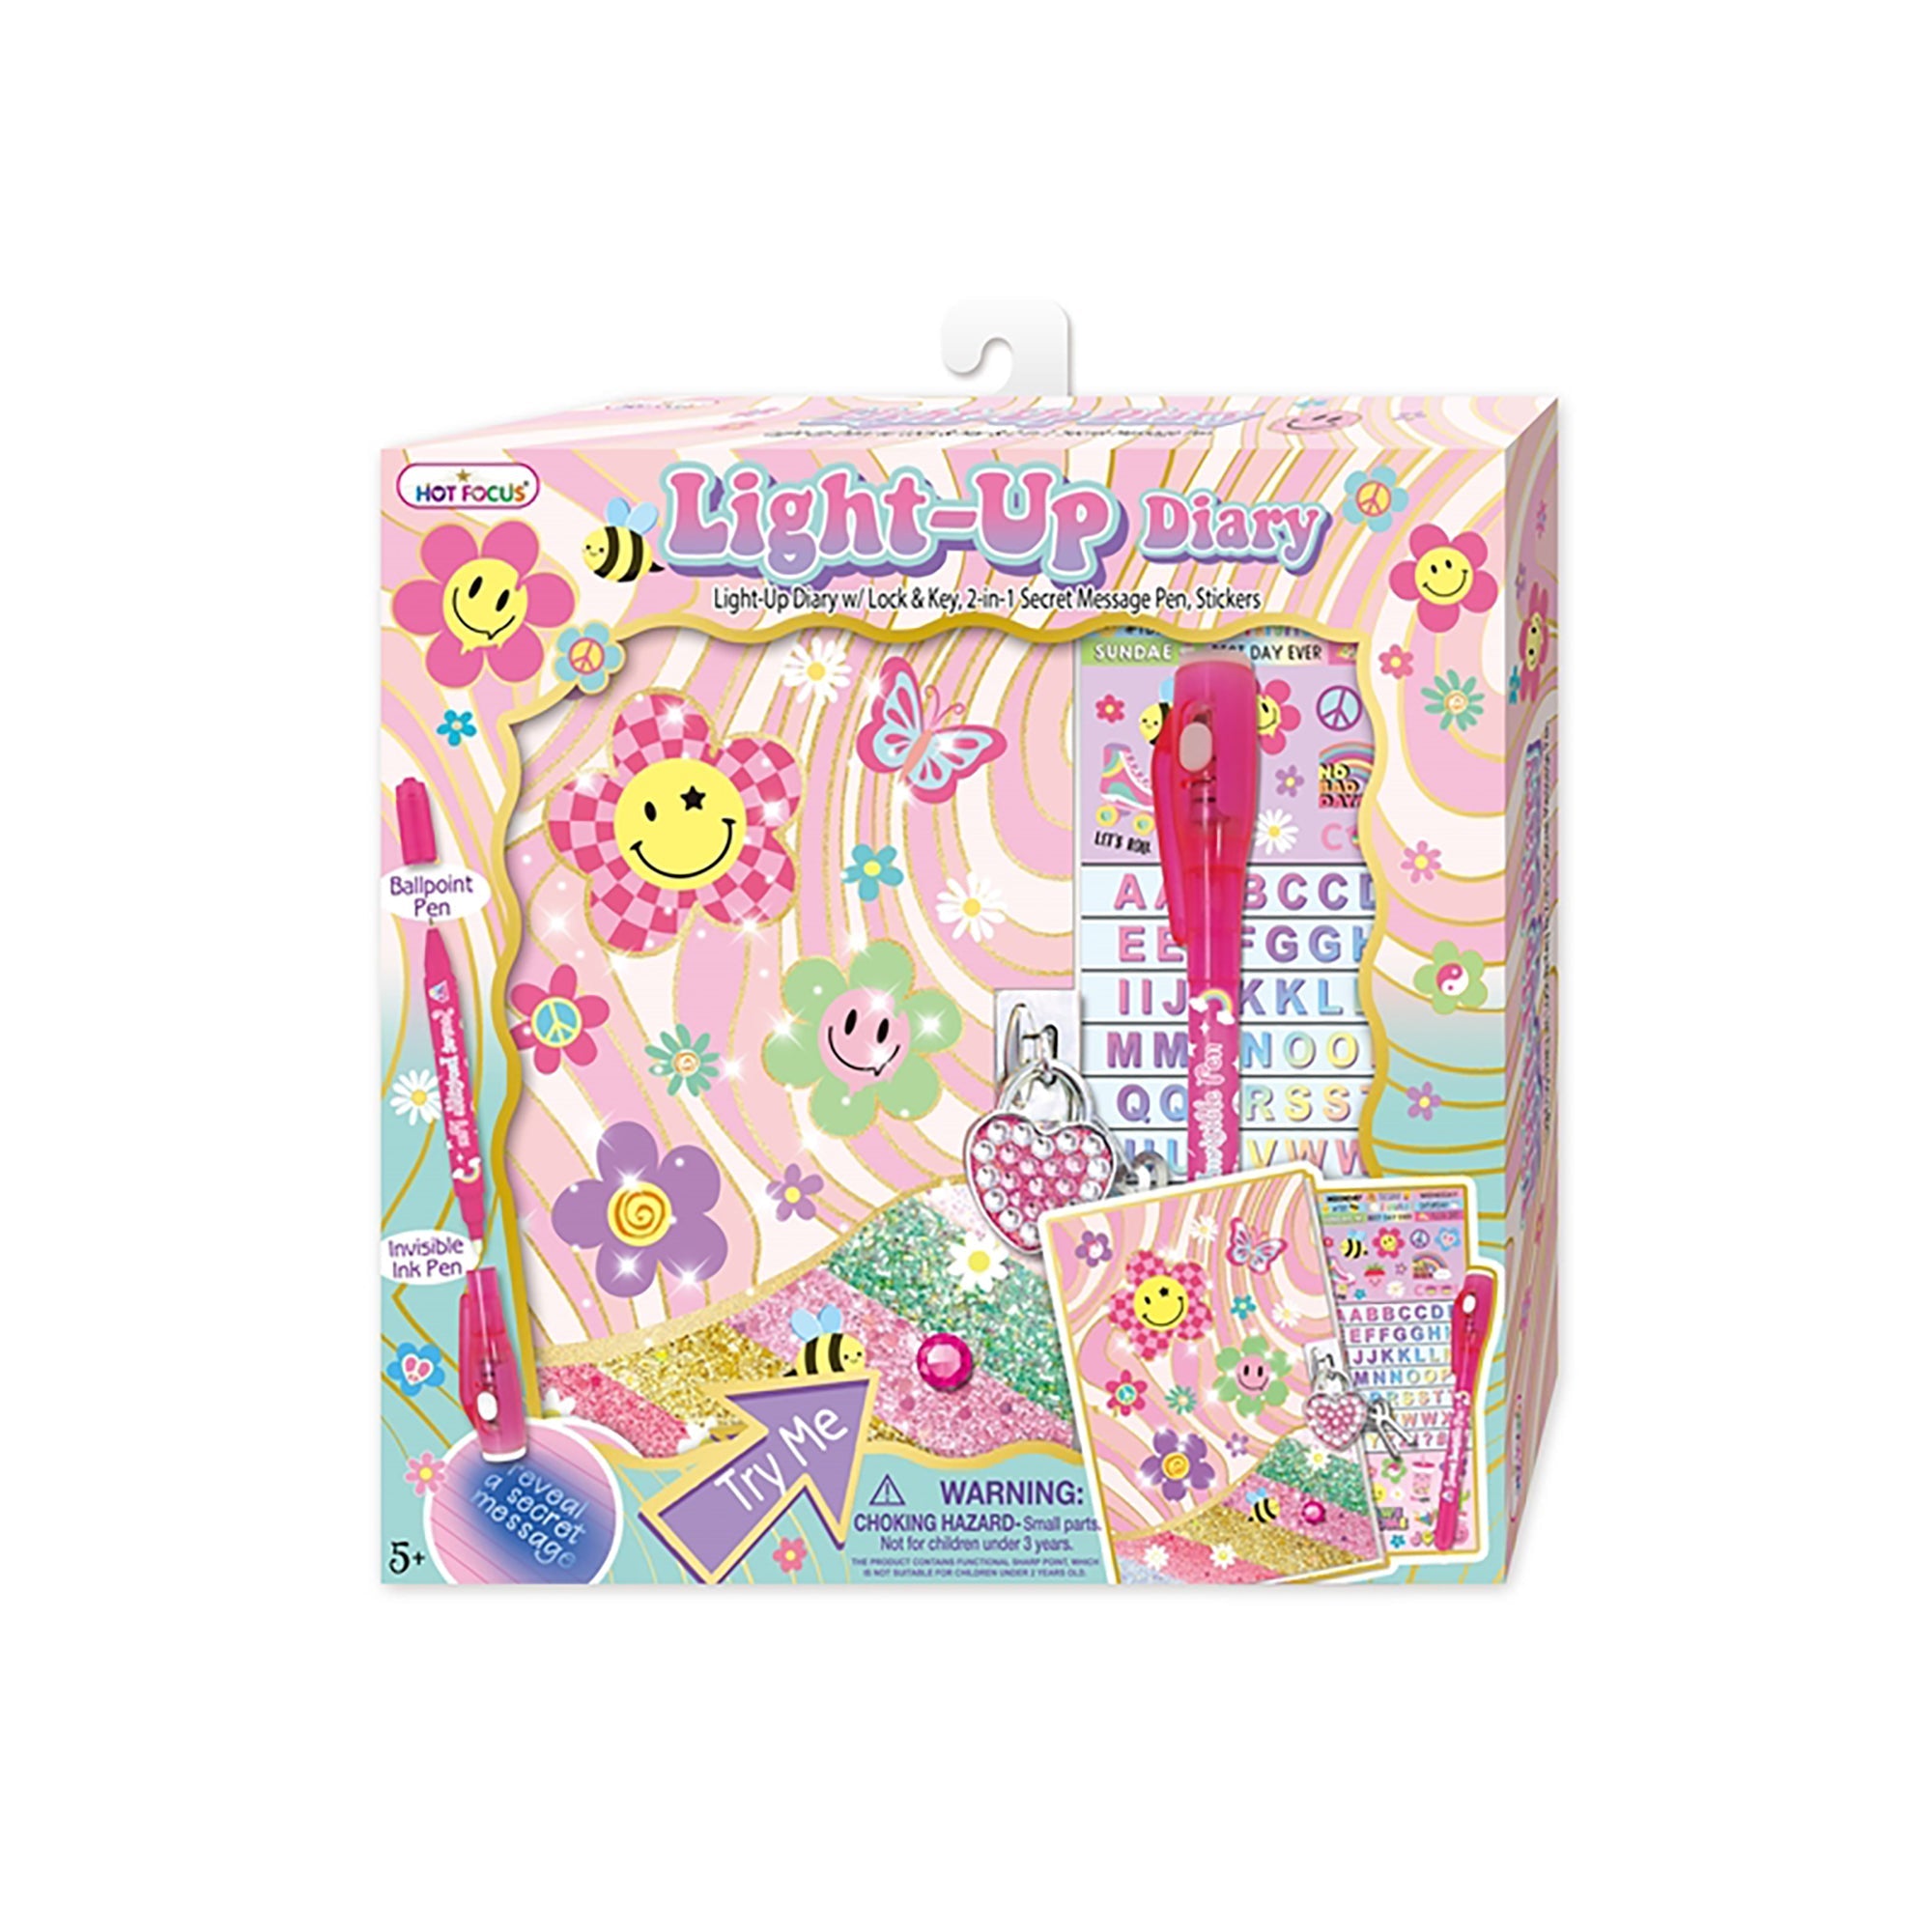 Groovy Flower Light-Up Diary Kit, 1 Count